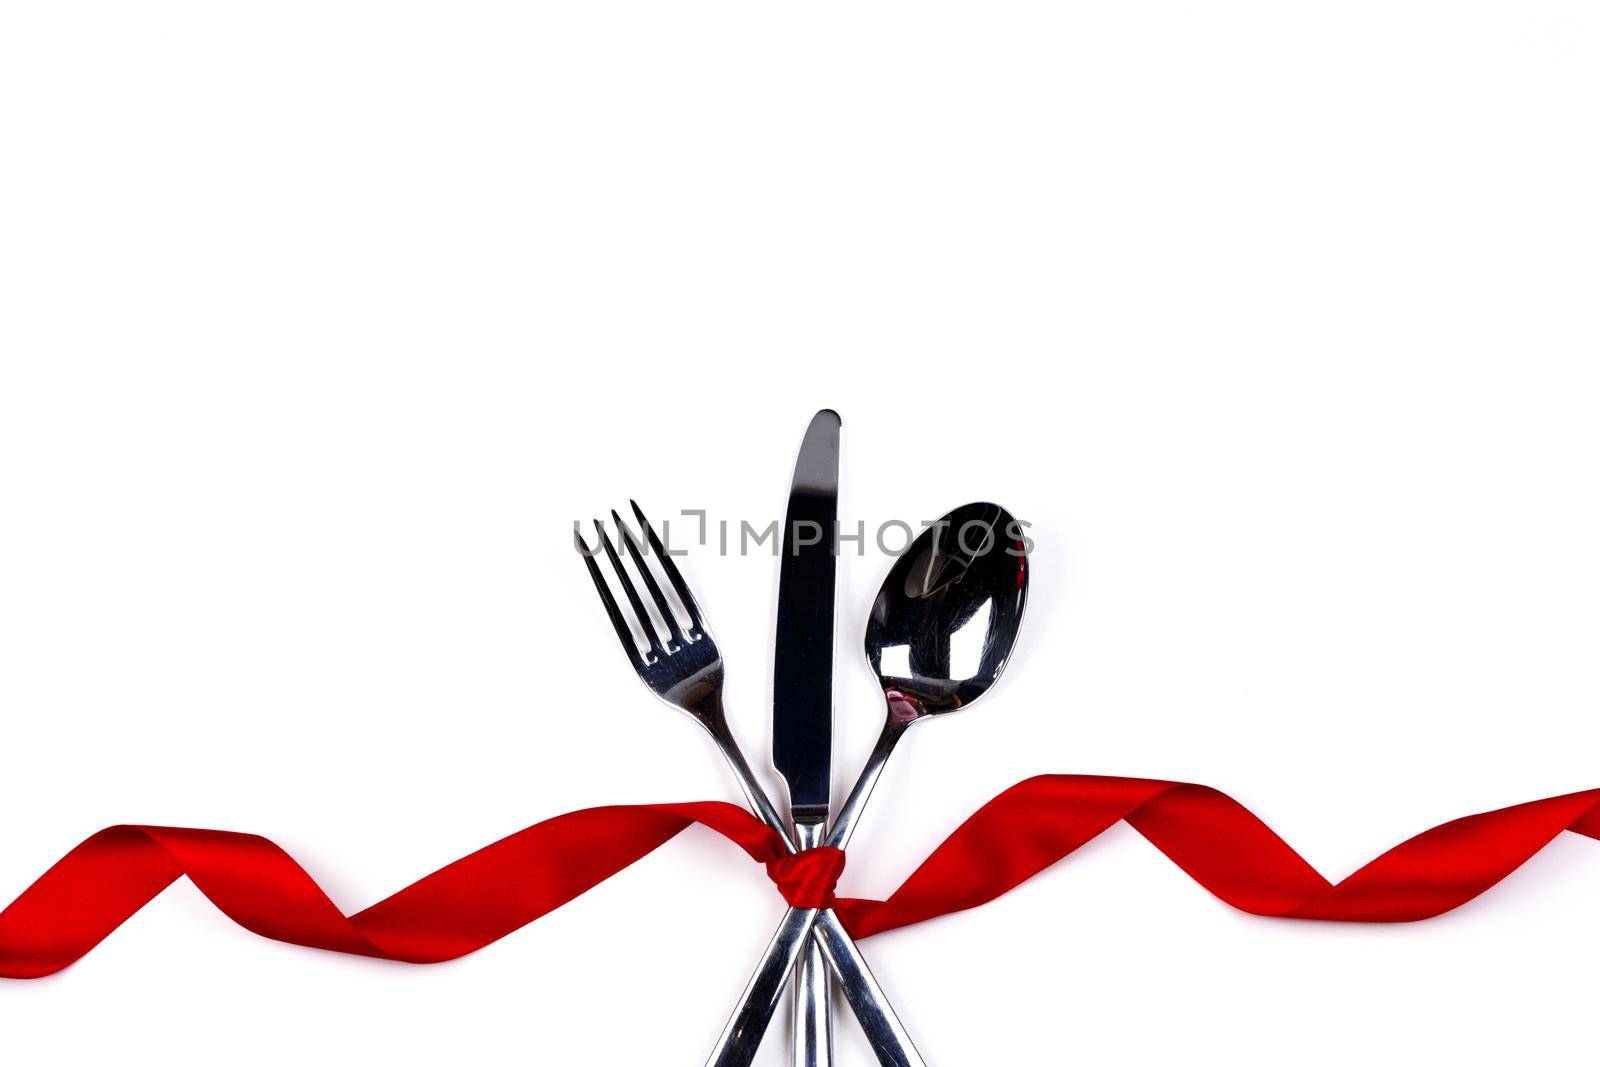 Cutlery set tied with silk ribbon by Yellowj